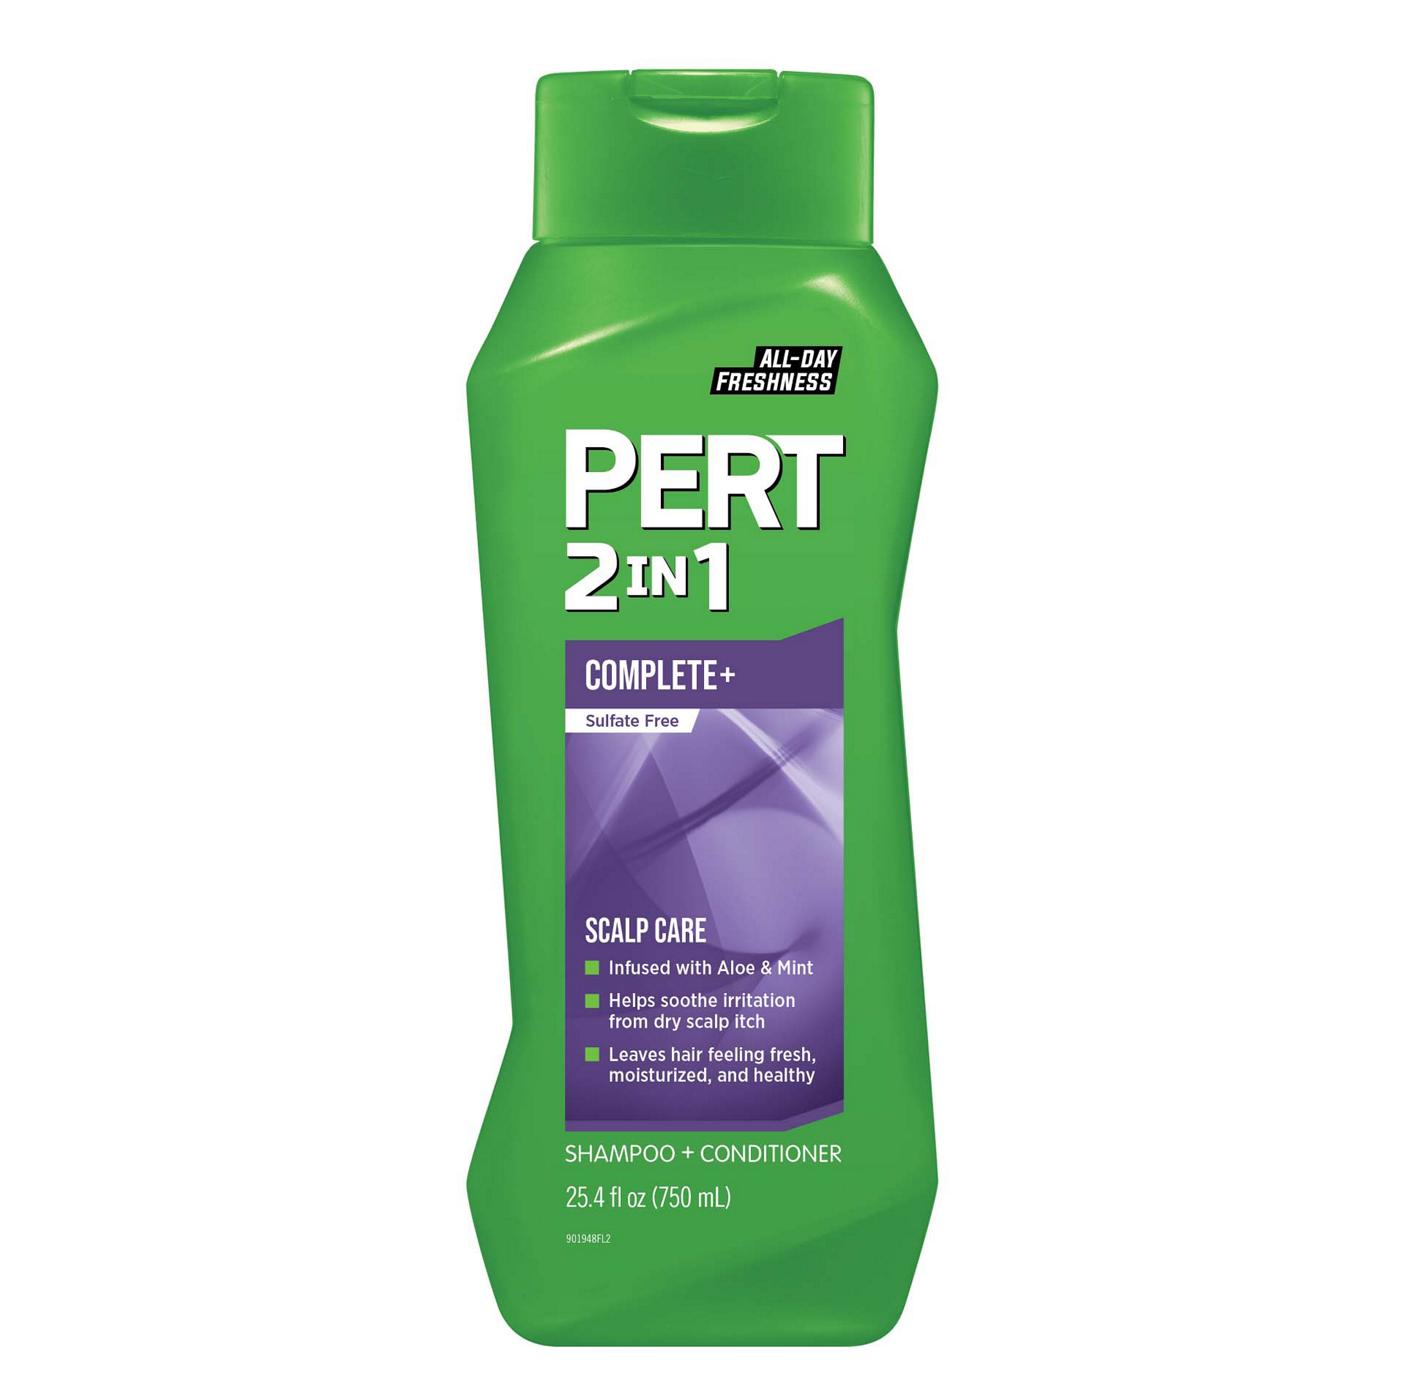 Pert 2 In 1 Complete+ Scalp Care Shampoo + Conditioner; image 1 of 2